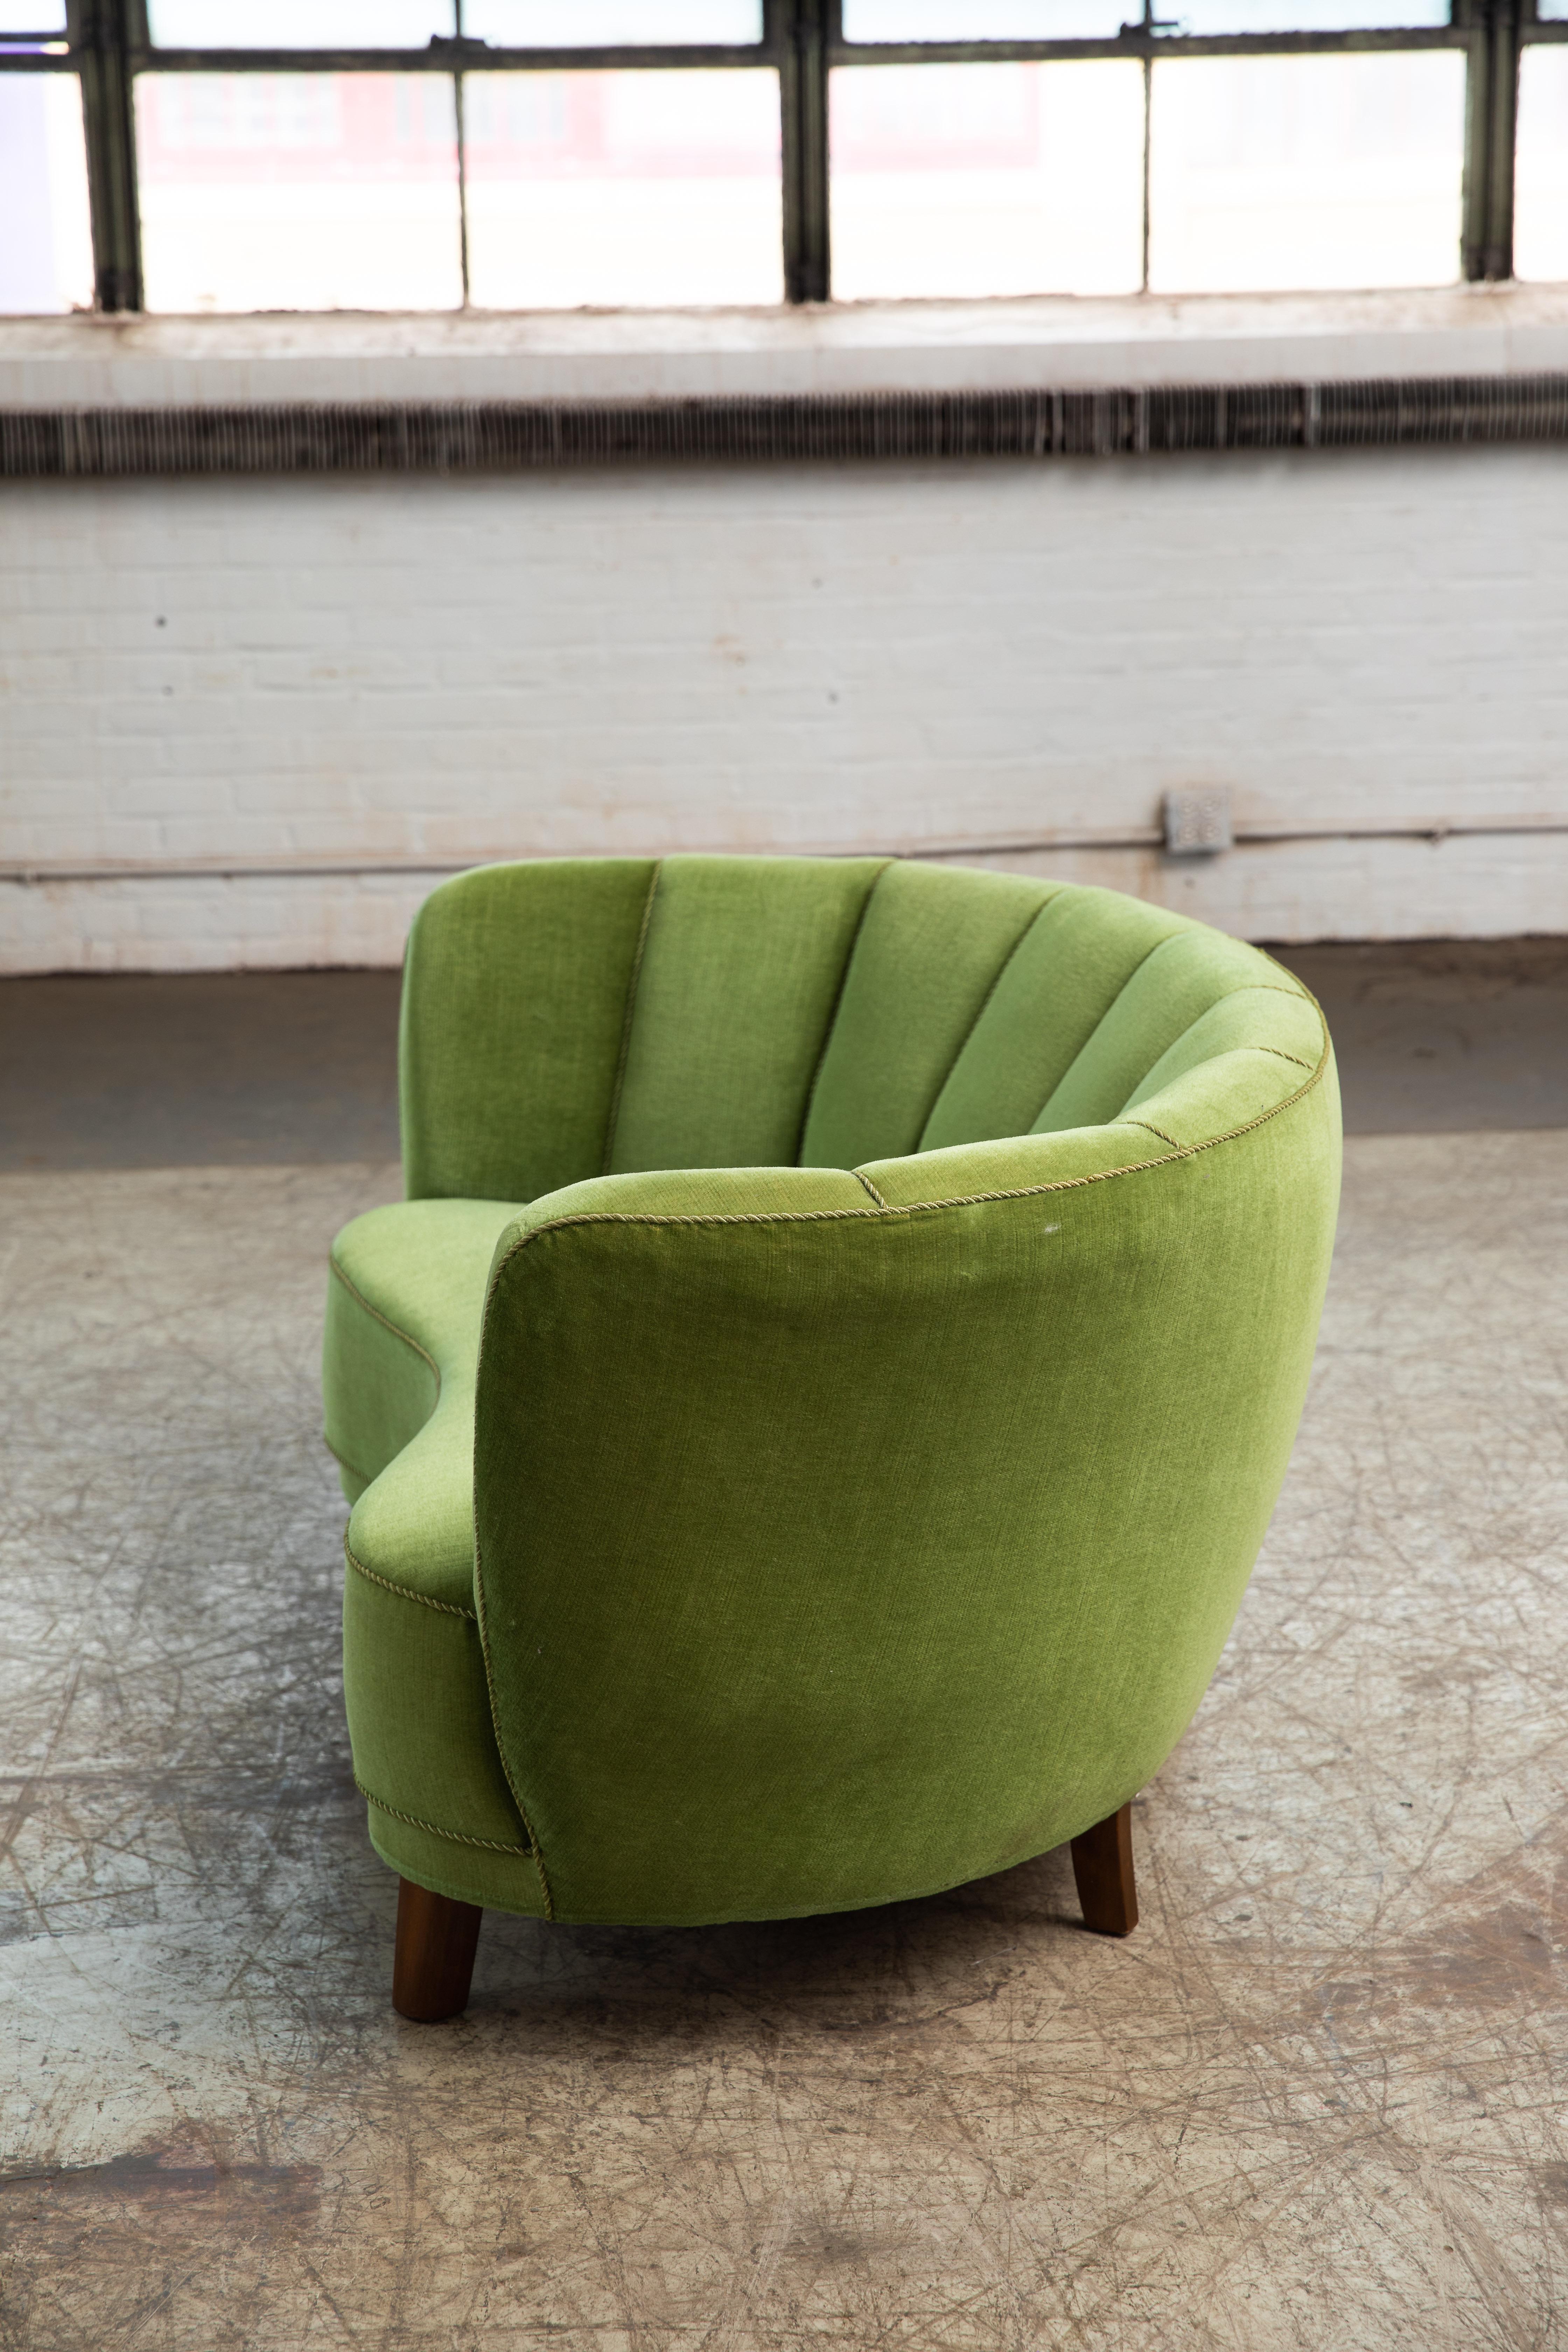 Mid-20th Century Danish 1940s Boesen Style Banana Form Curved Sofa or Loveseat in Green Mohair